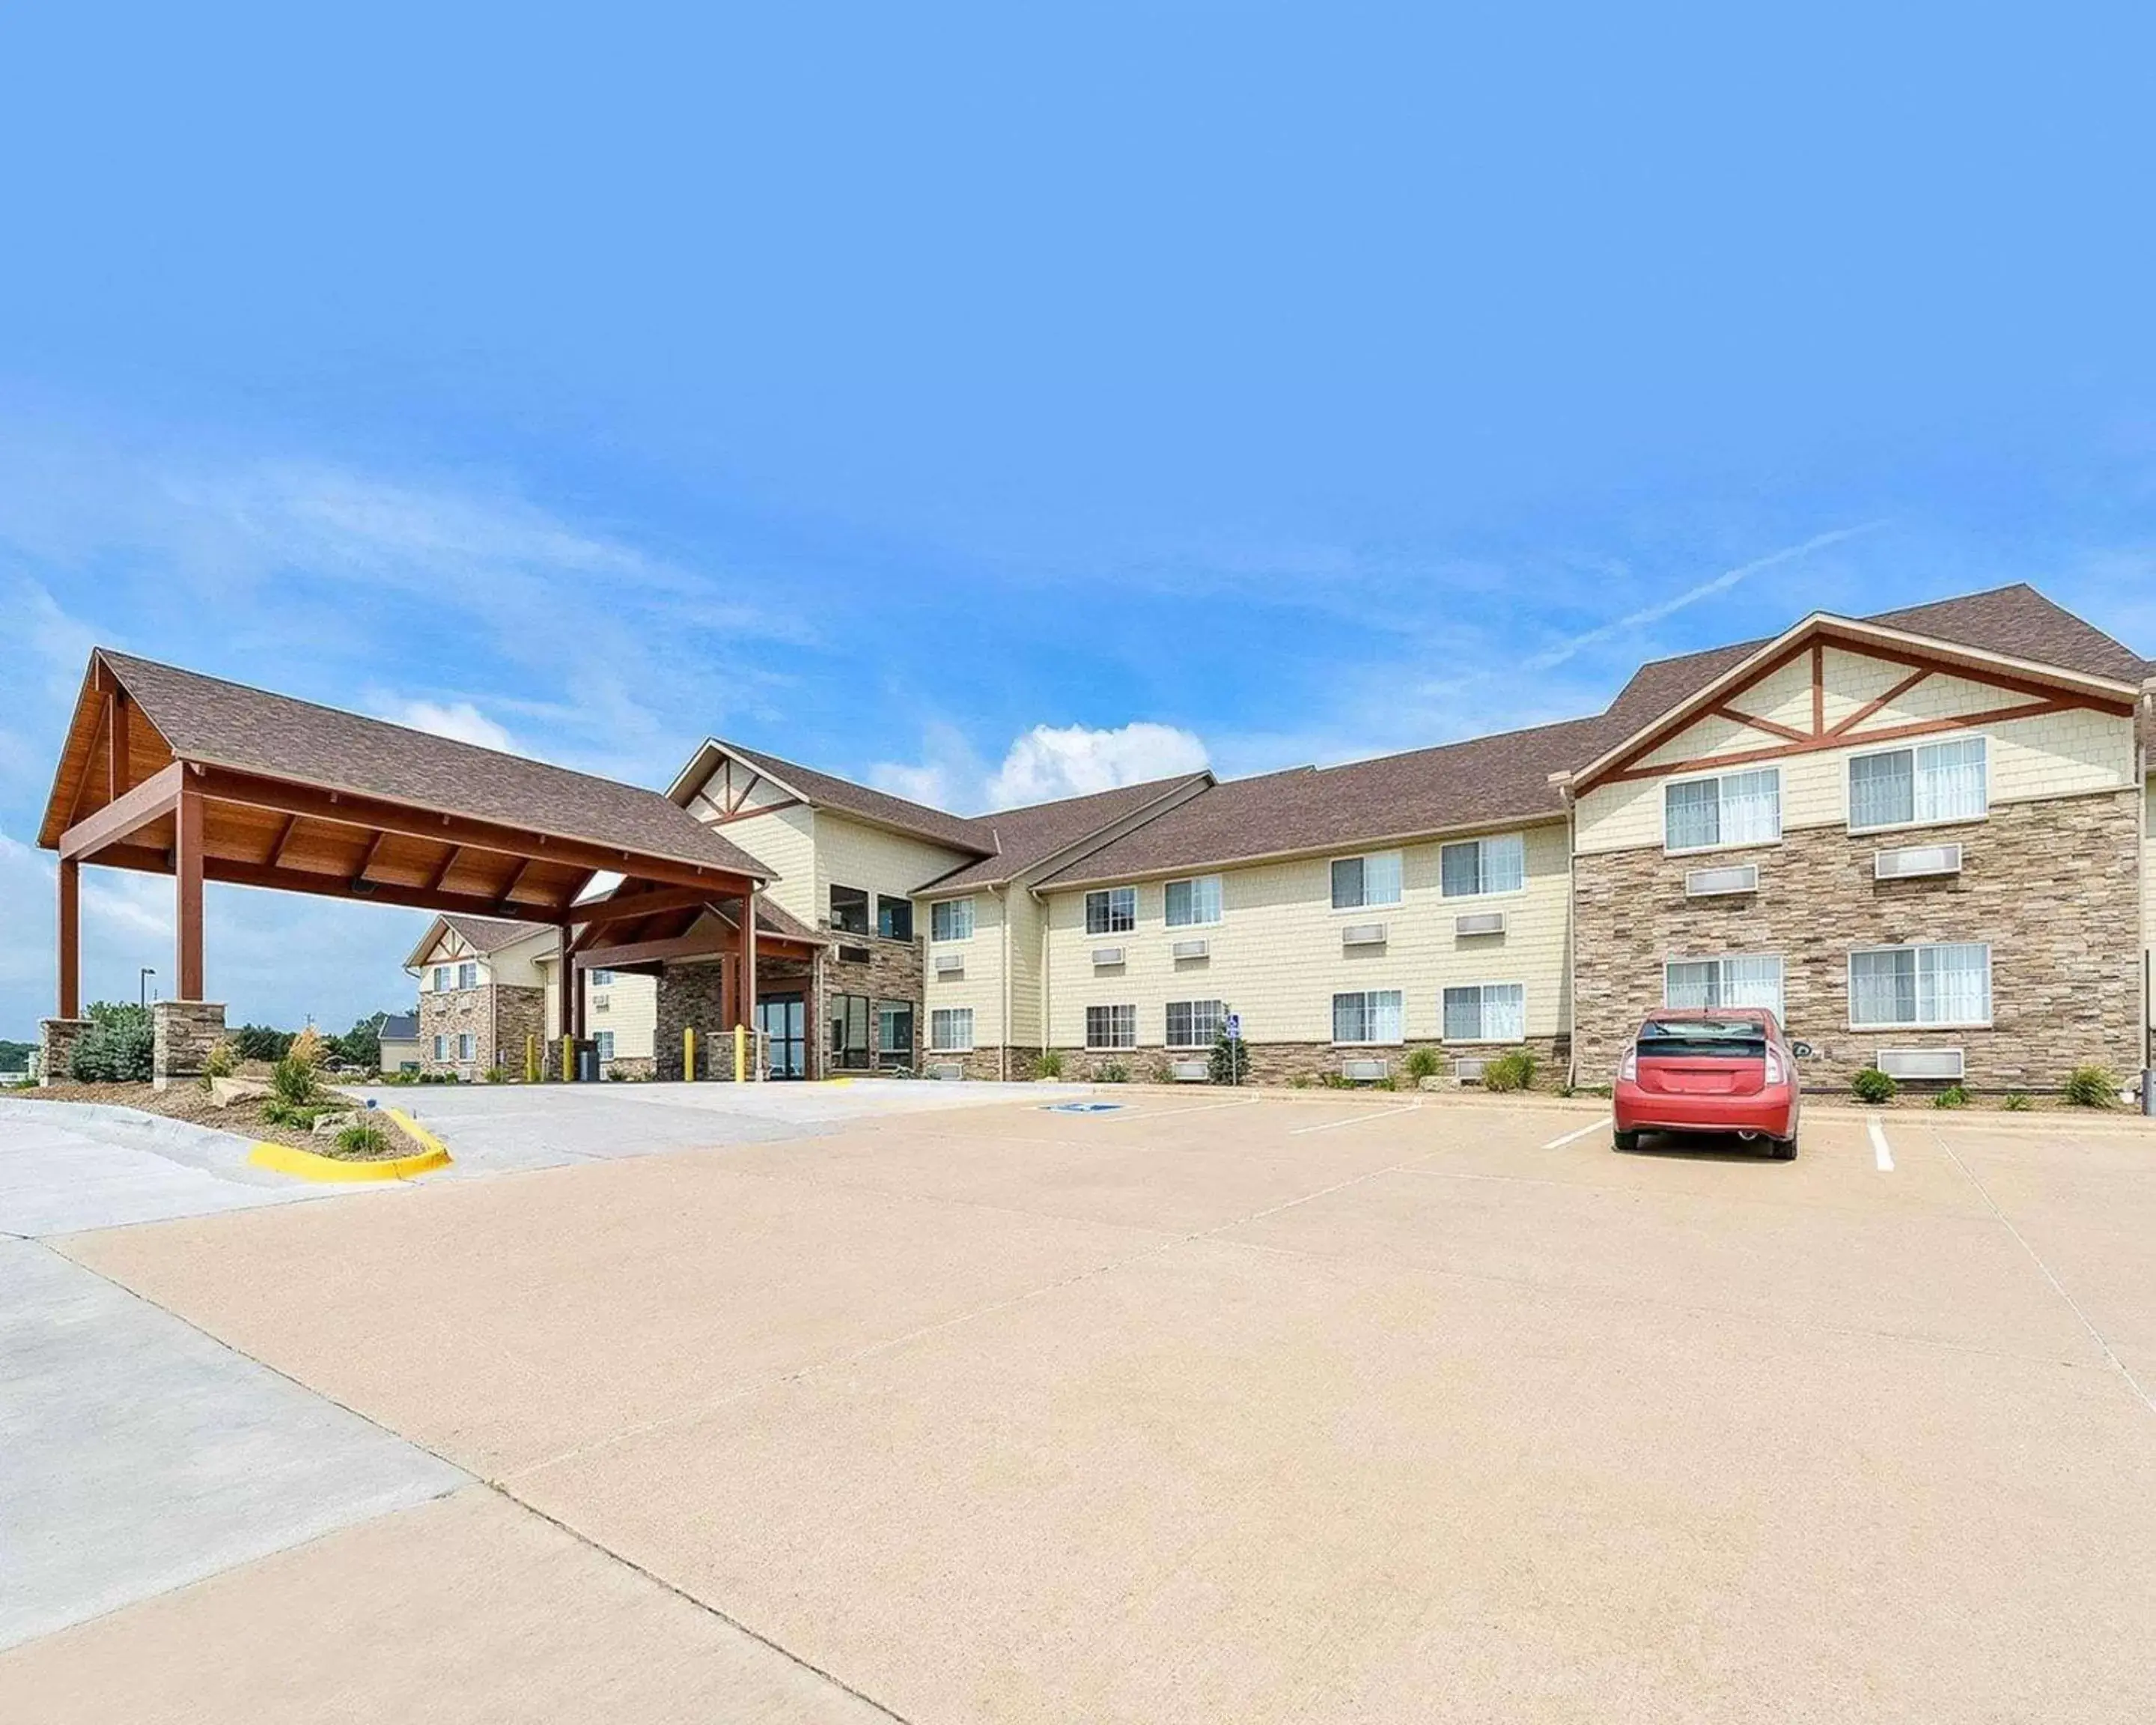 Property Building in Comfort Inn & Suites Riverview near Davenport and I-80